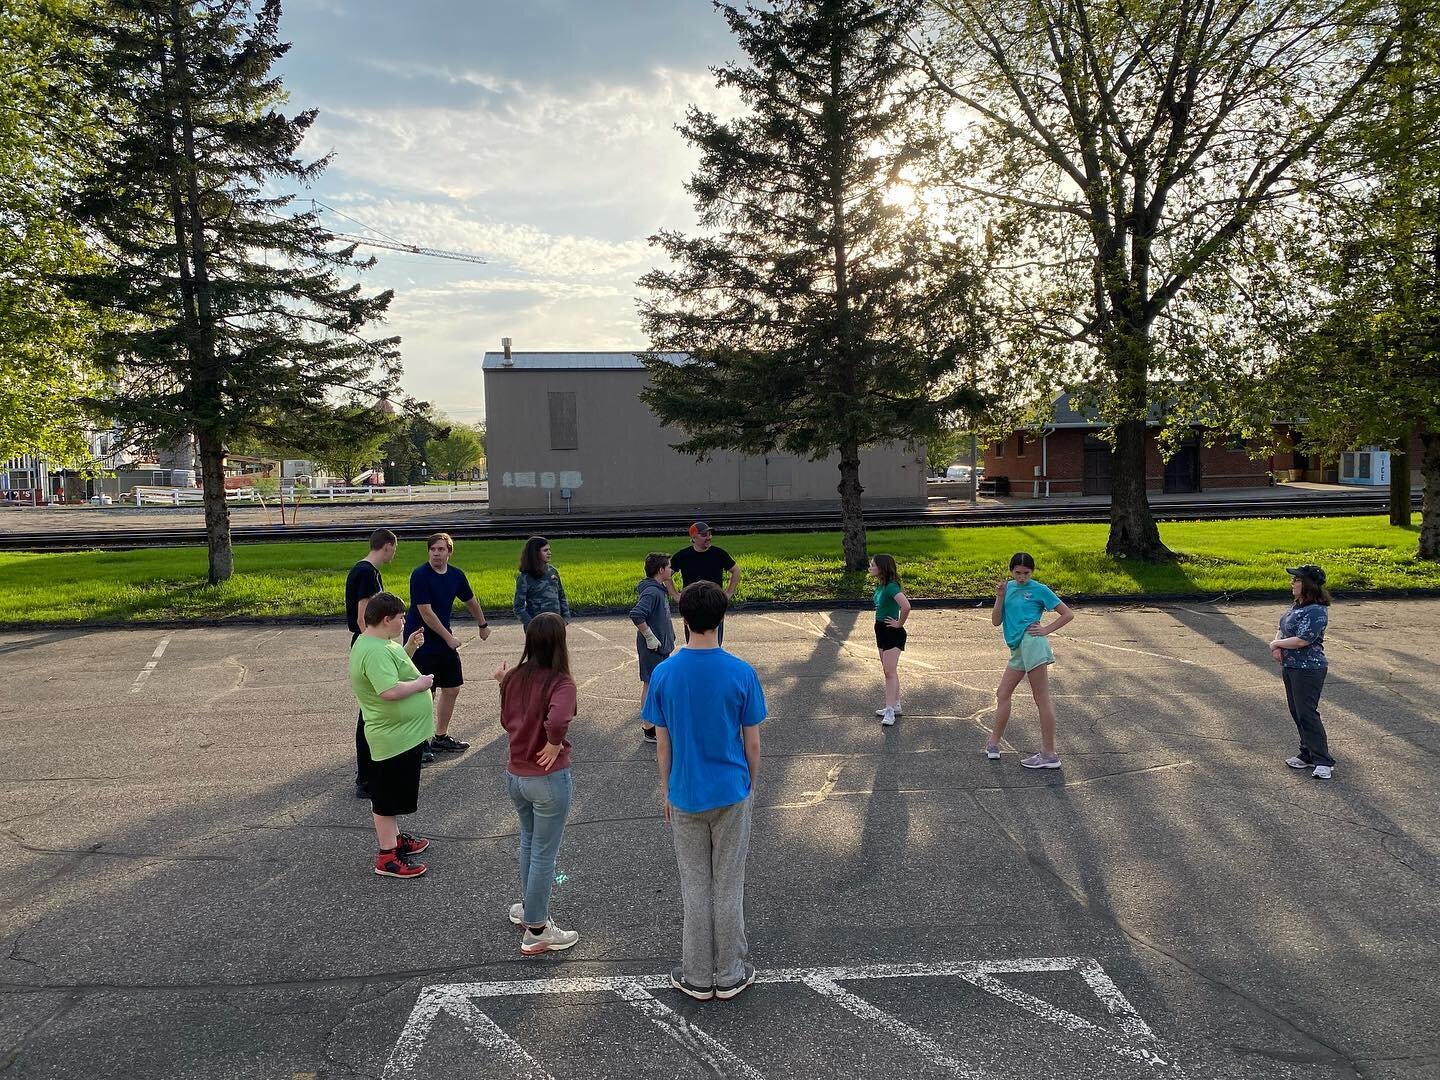 The weather was so nice we played capture the flag outside! Congrats Red team! Brody crushed it with the role of Accountability in Fixing the Broken Relationship. Five star night!